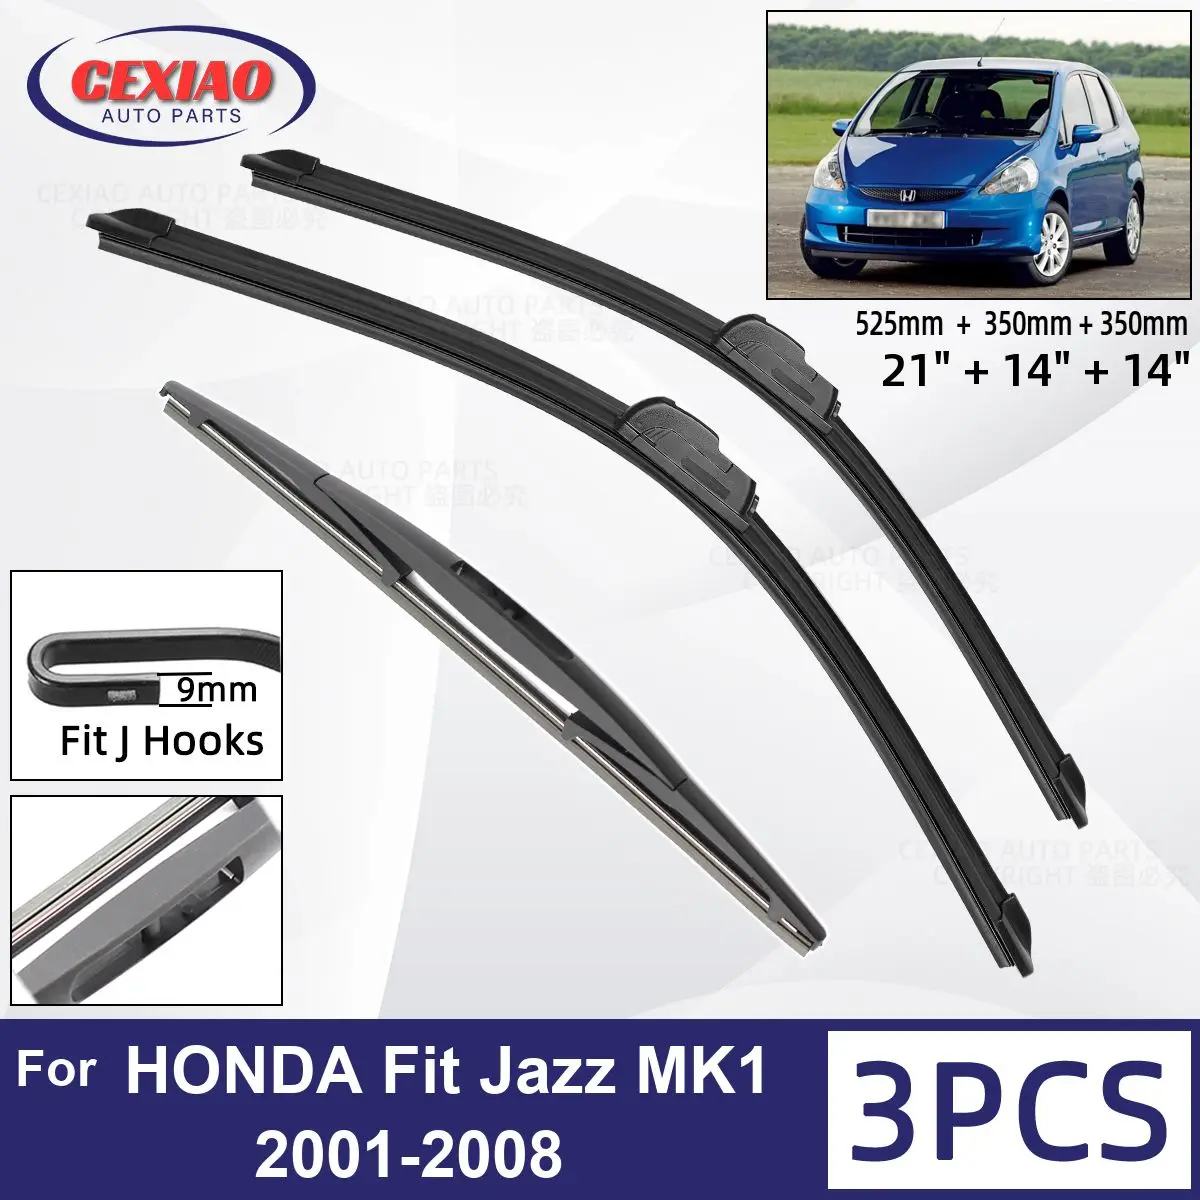 

For HONDA Fit Jazz MK1 2001-2008 Car Front Rear Wiper Blades Soft Rubber Windscreen Wipers Auto Windshield 21"+14"+14" 2006 2007